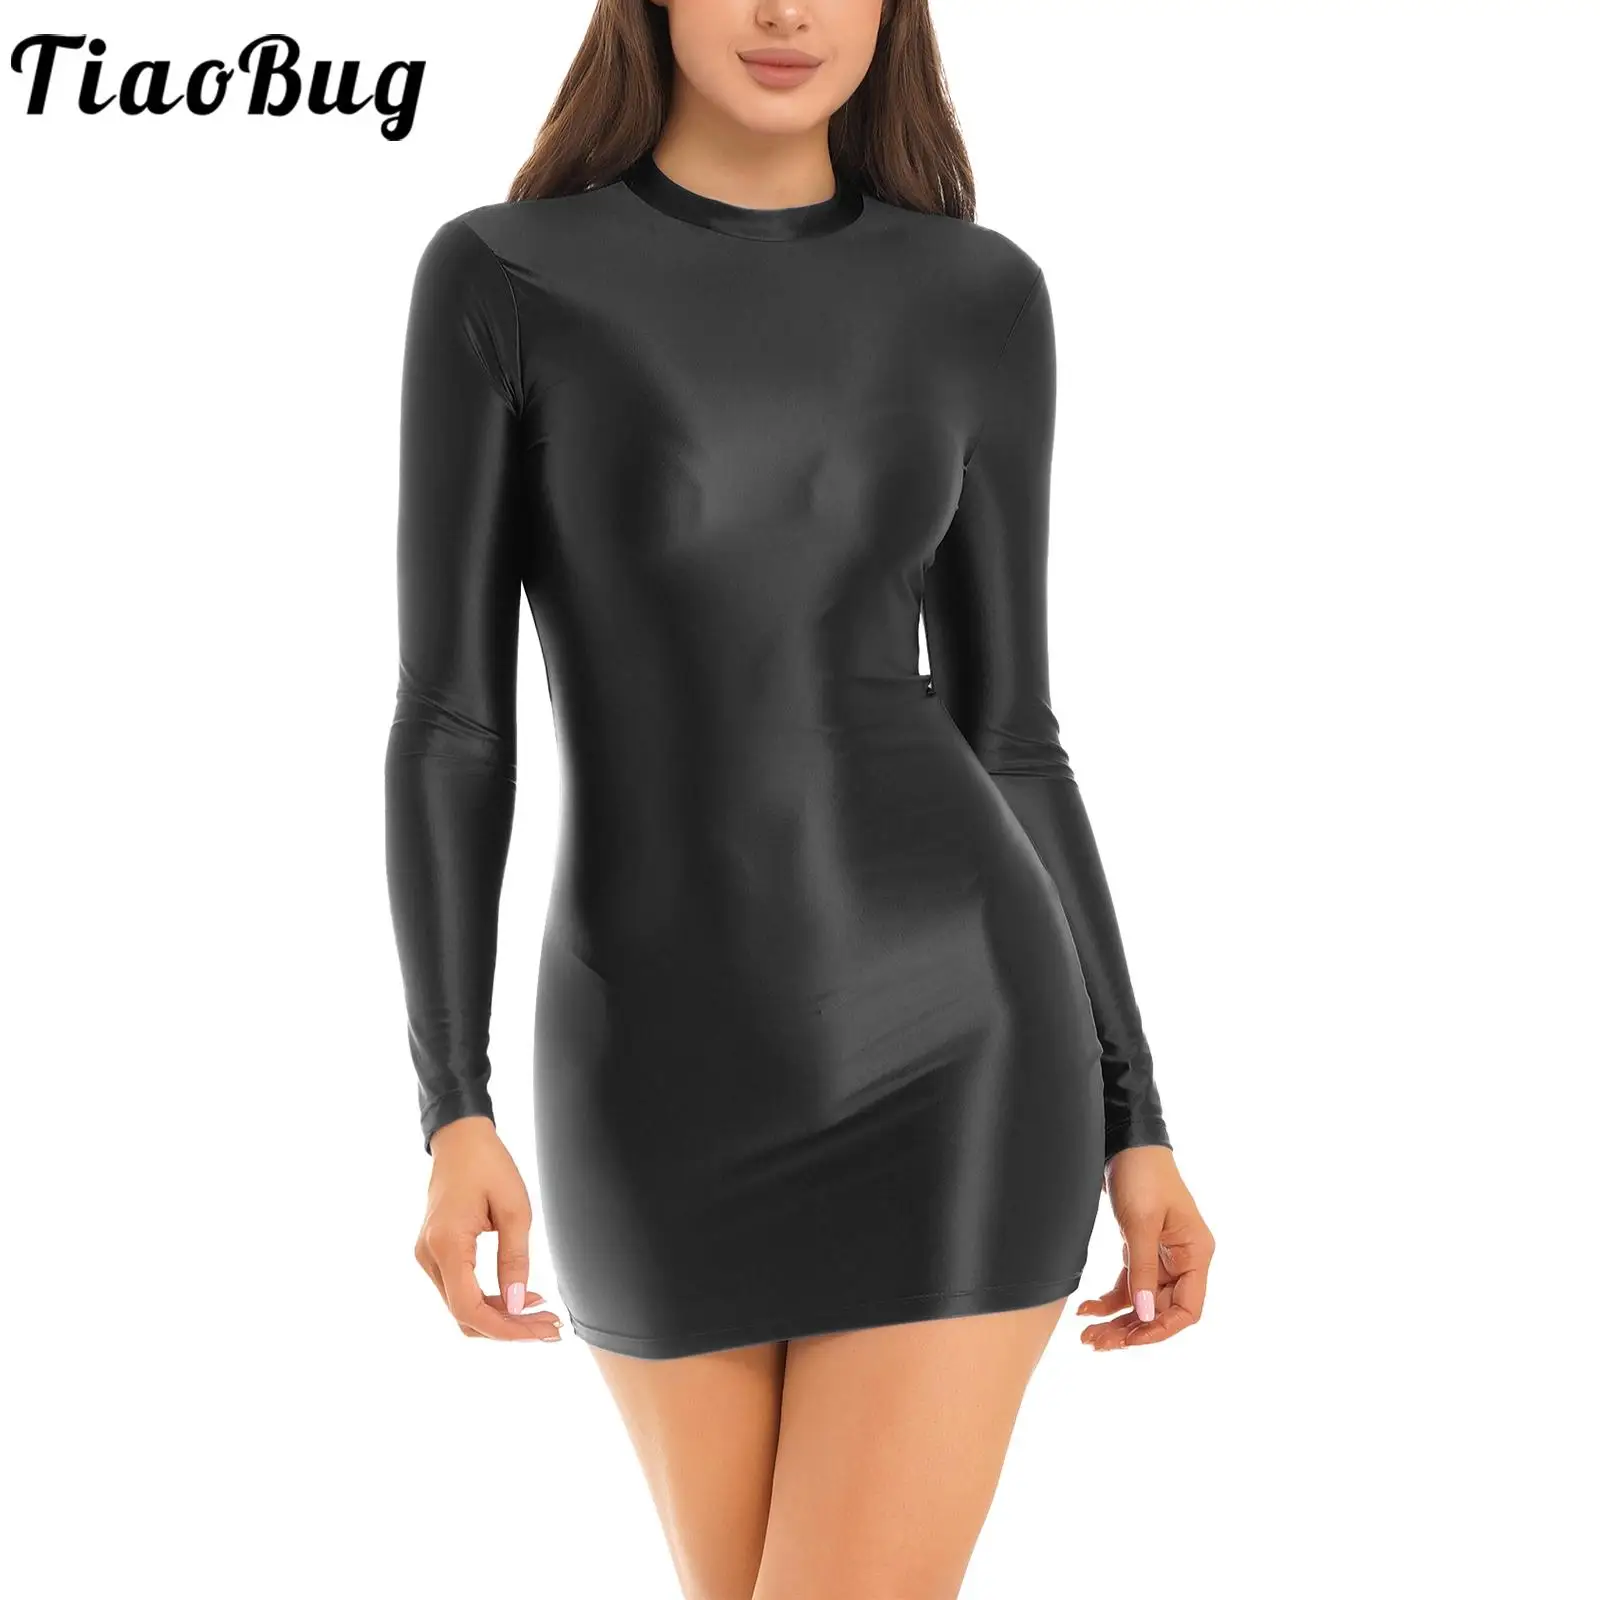 Women Sexy Oil Glossy Micro Mini Dress Tight Party Dress Pencil Bodycon Dress Club Outfit Nightwear Pole Dancing Costume